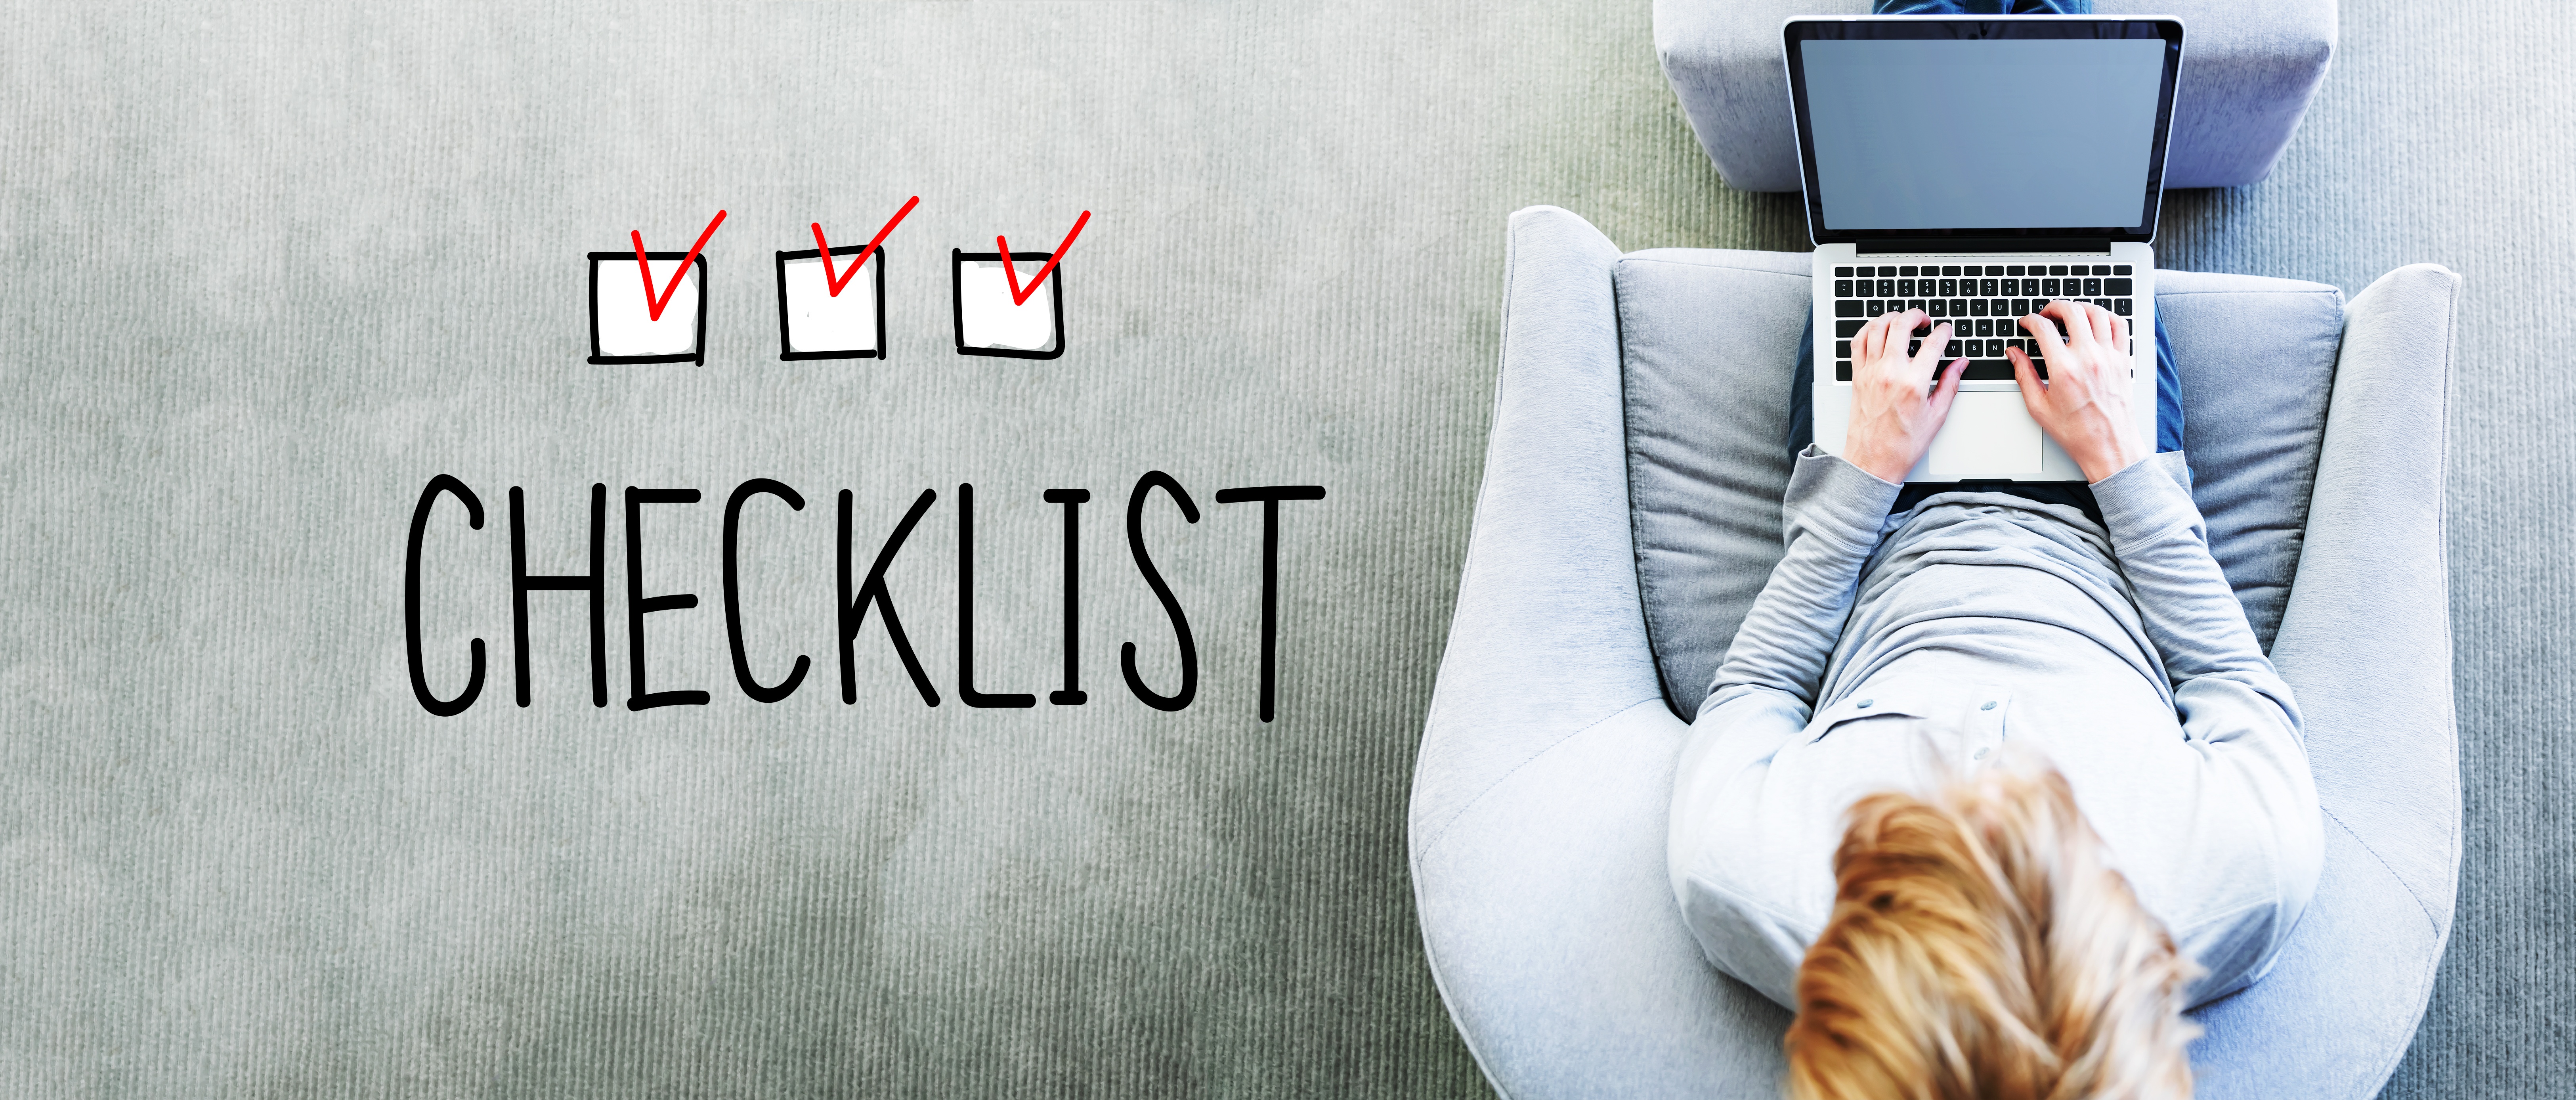 Crowdfunding Video Production Checklist